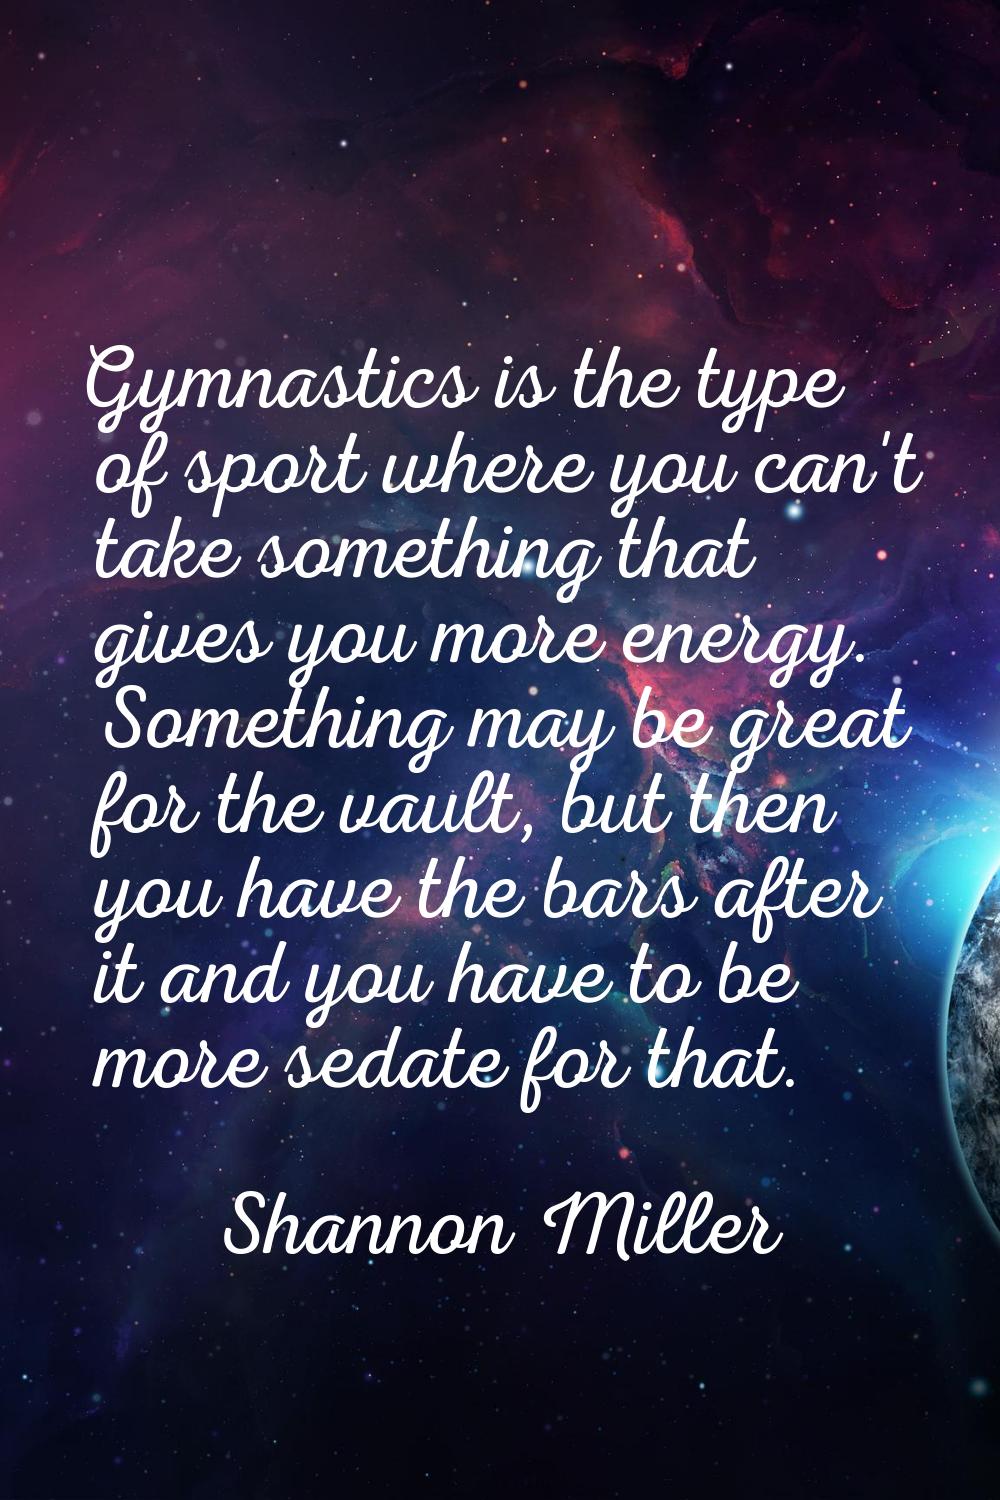 Gymnastics is the type of sport where you can't take something that gives you more energy. Somethin